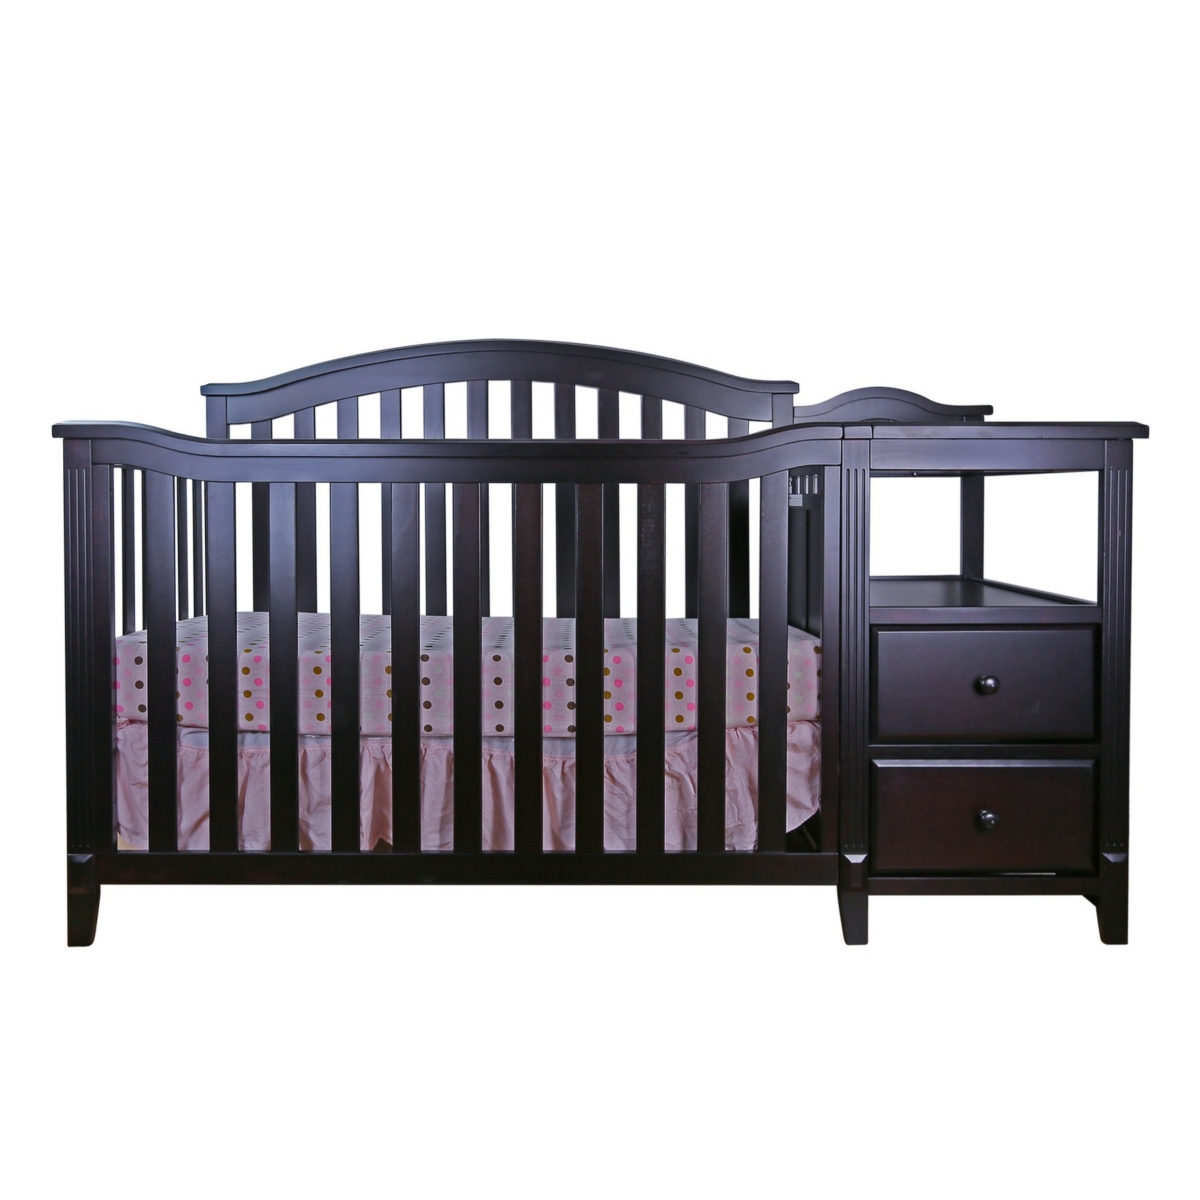 Athena Kali 4-in-1 Crib And Changer In Espresso